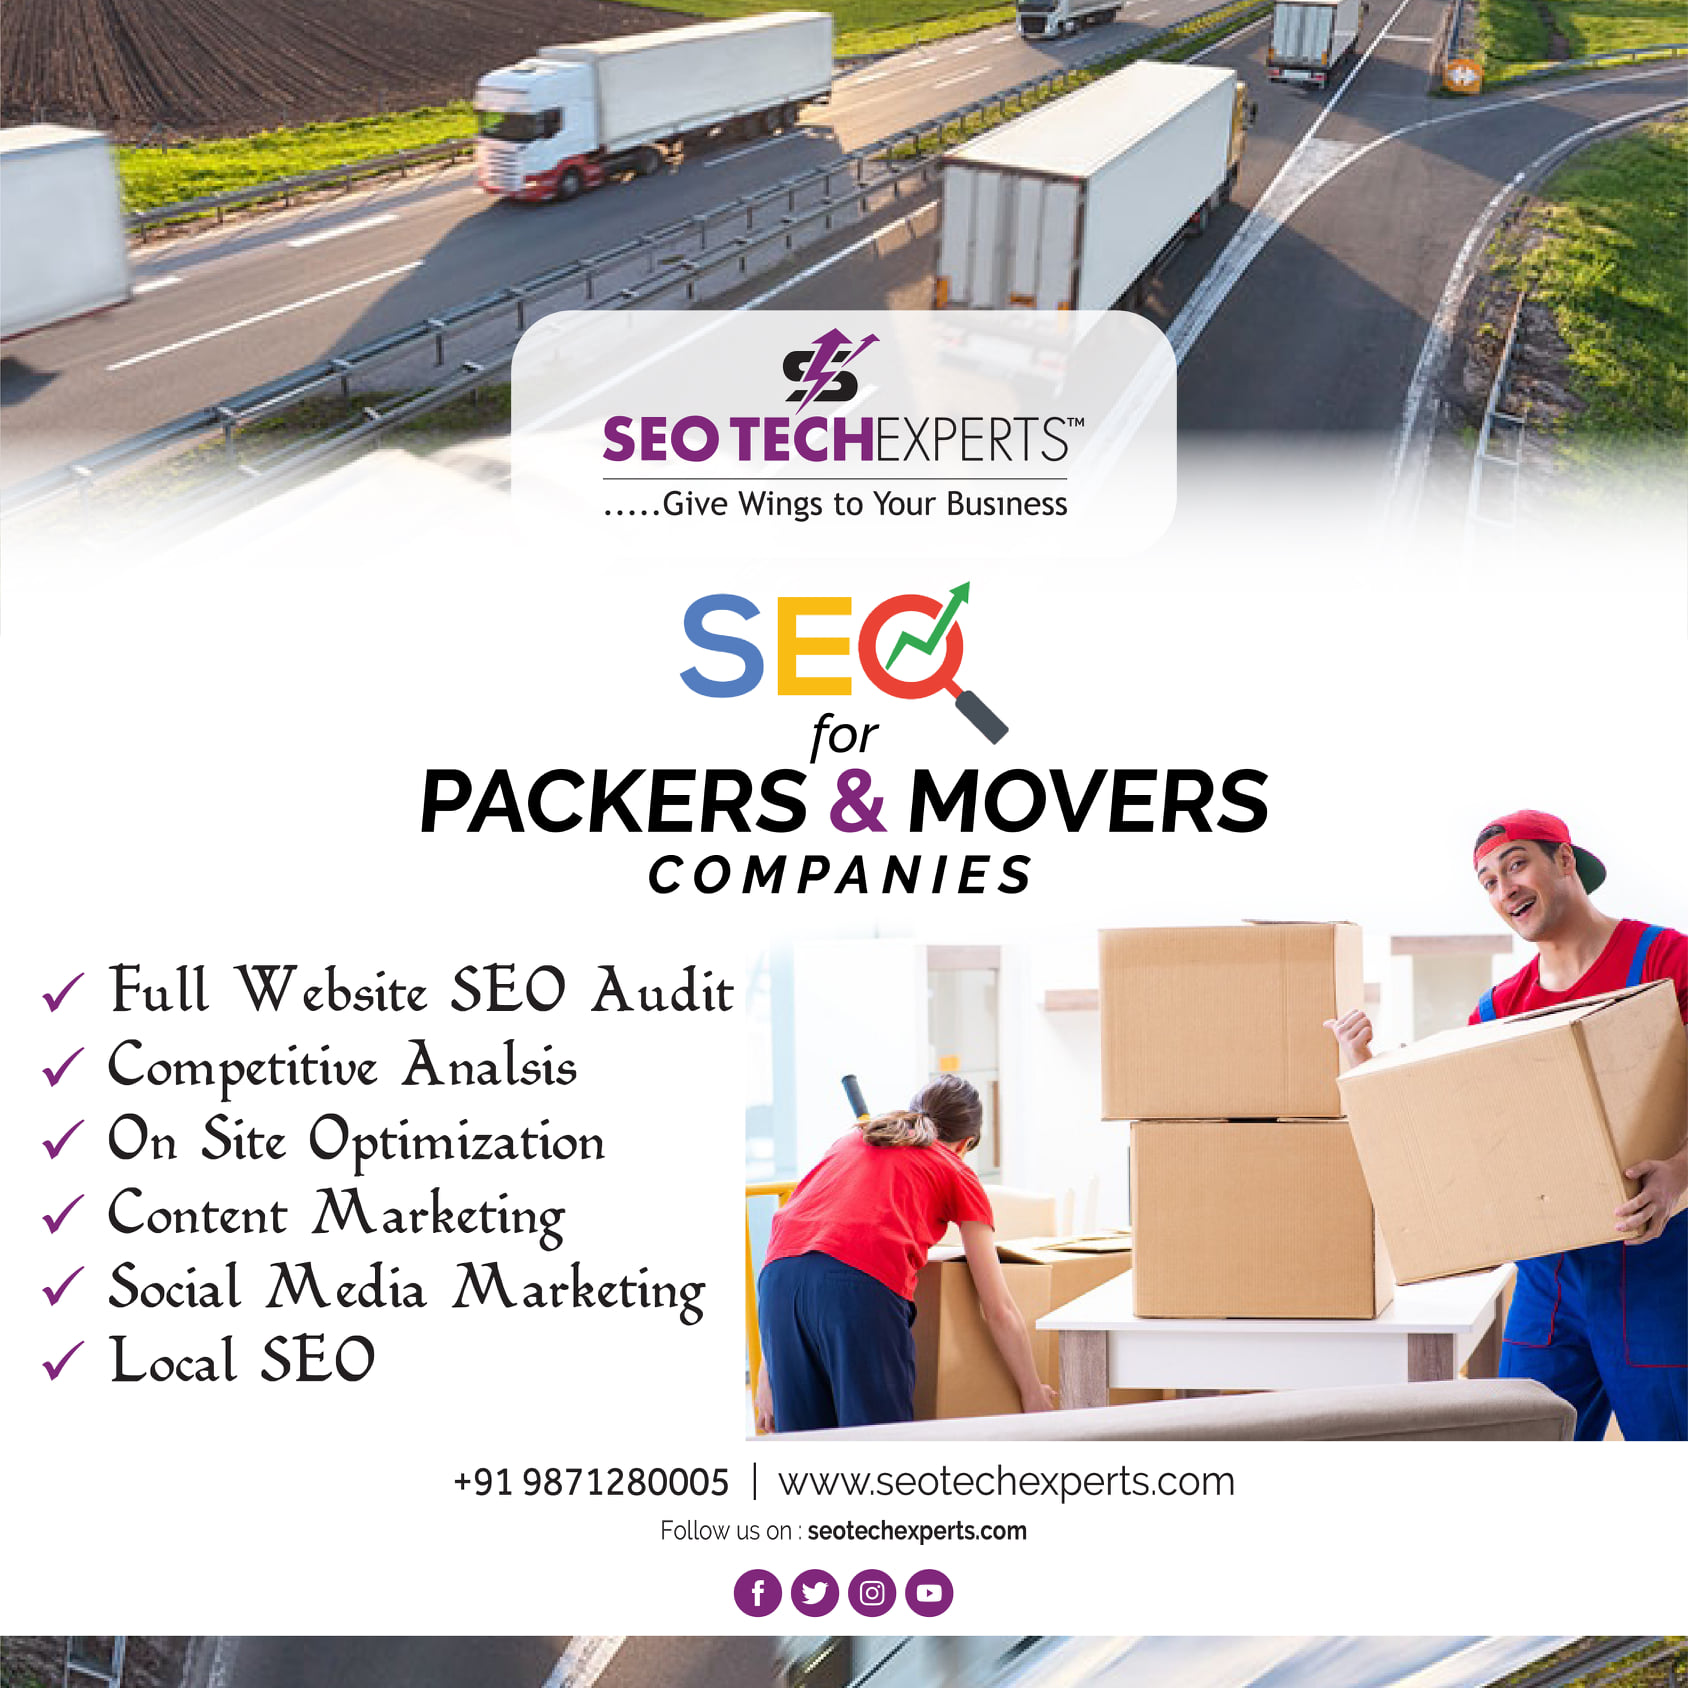 SEO Services for Packers & Movers Companies